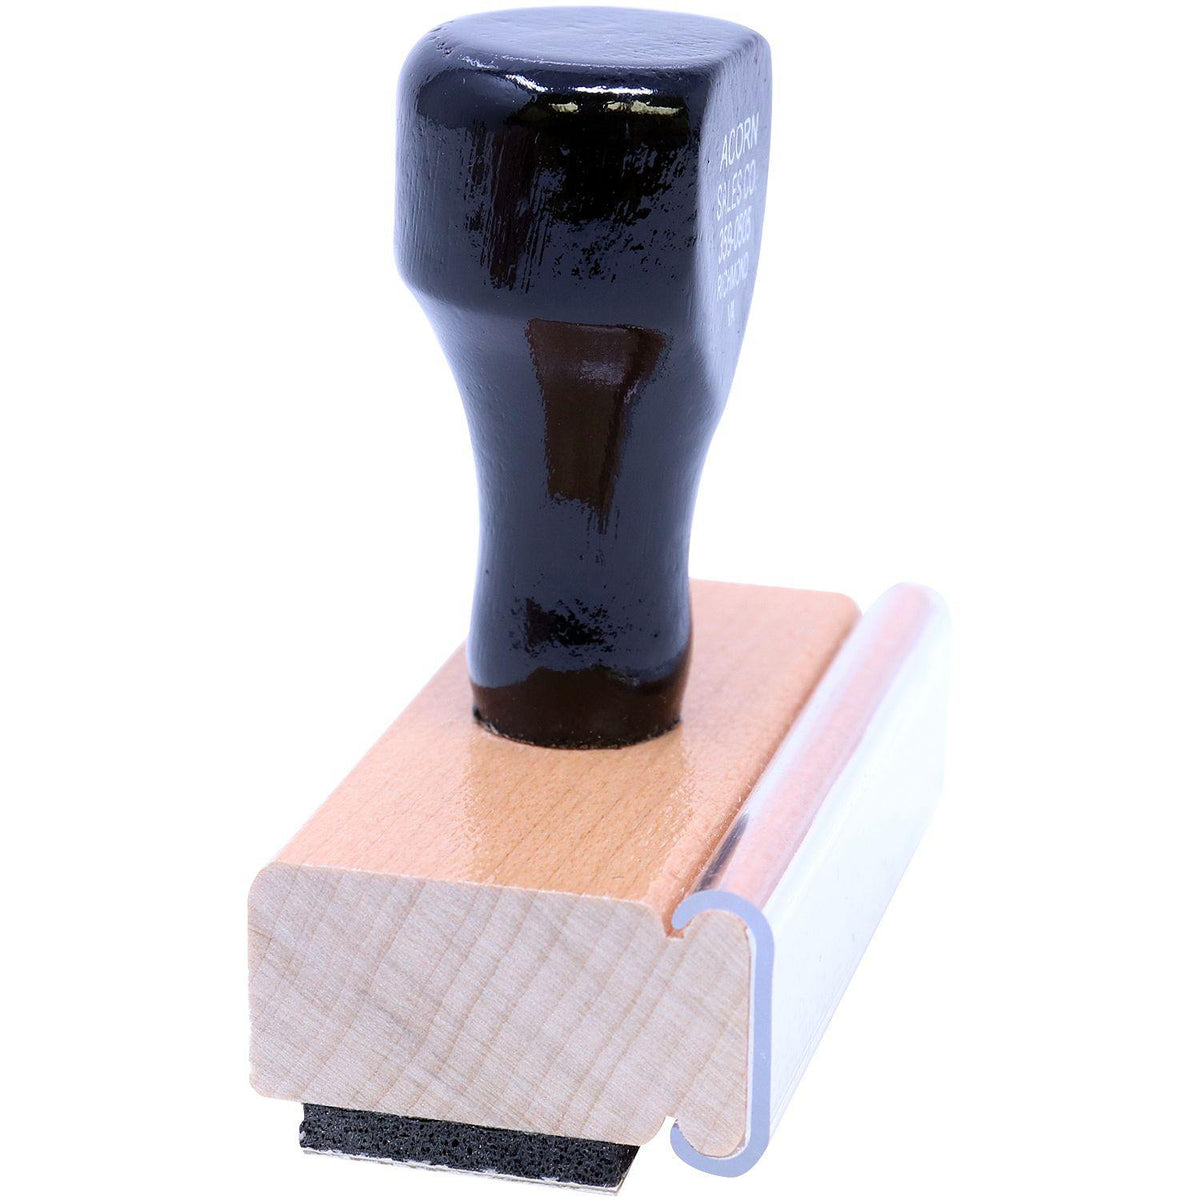 Side View of Bold X-Rays Rubber Stamp at an Angle